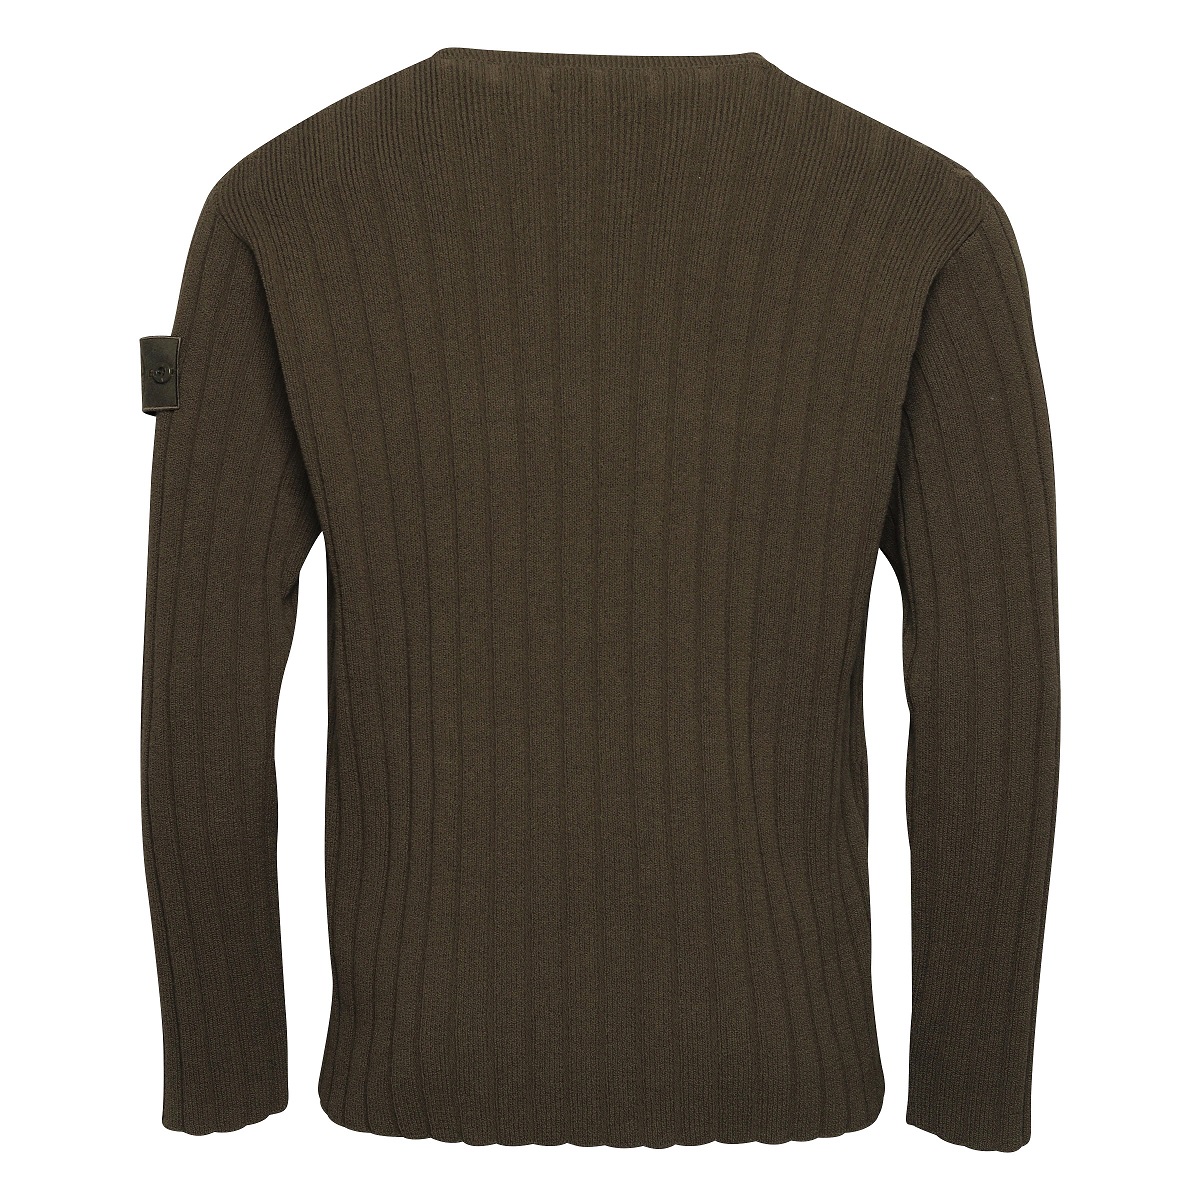 Stone Island Ghost Cotton Knit Pullover in Military Green M